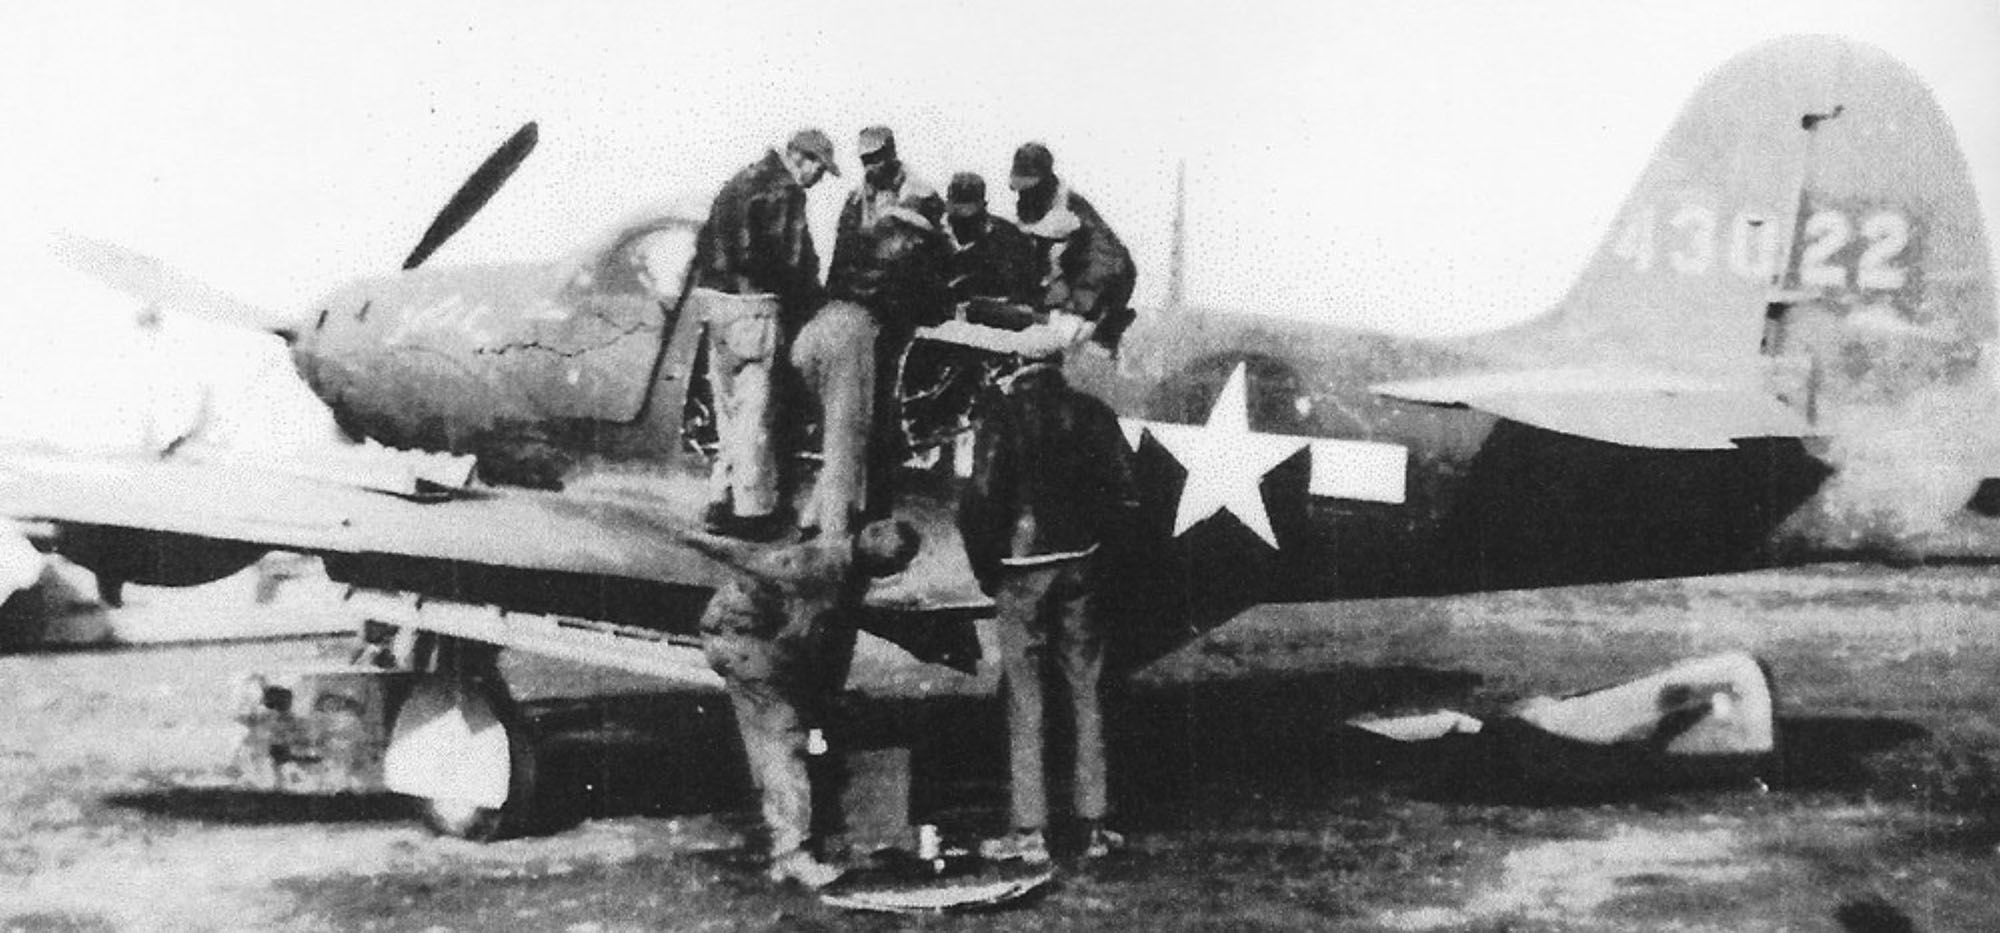 wwii photos of the 332nd fighter squad